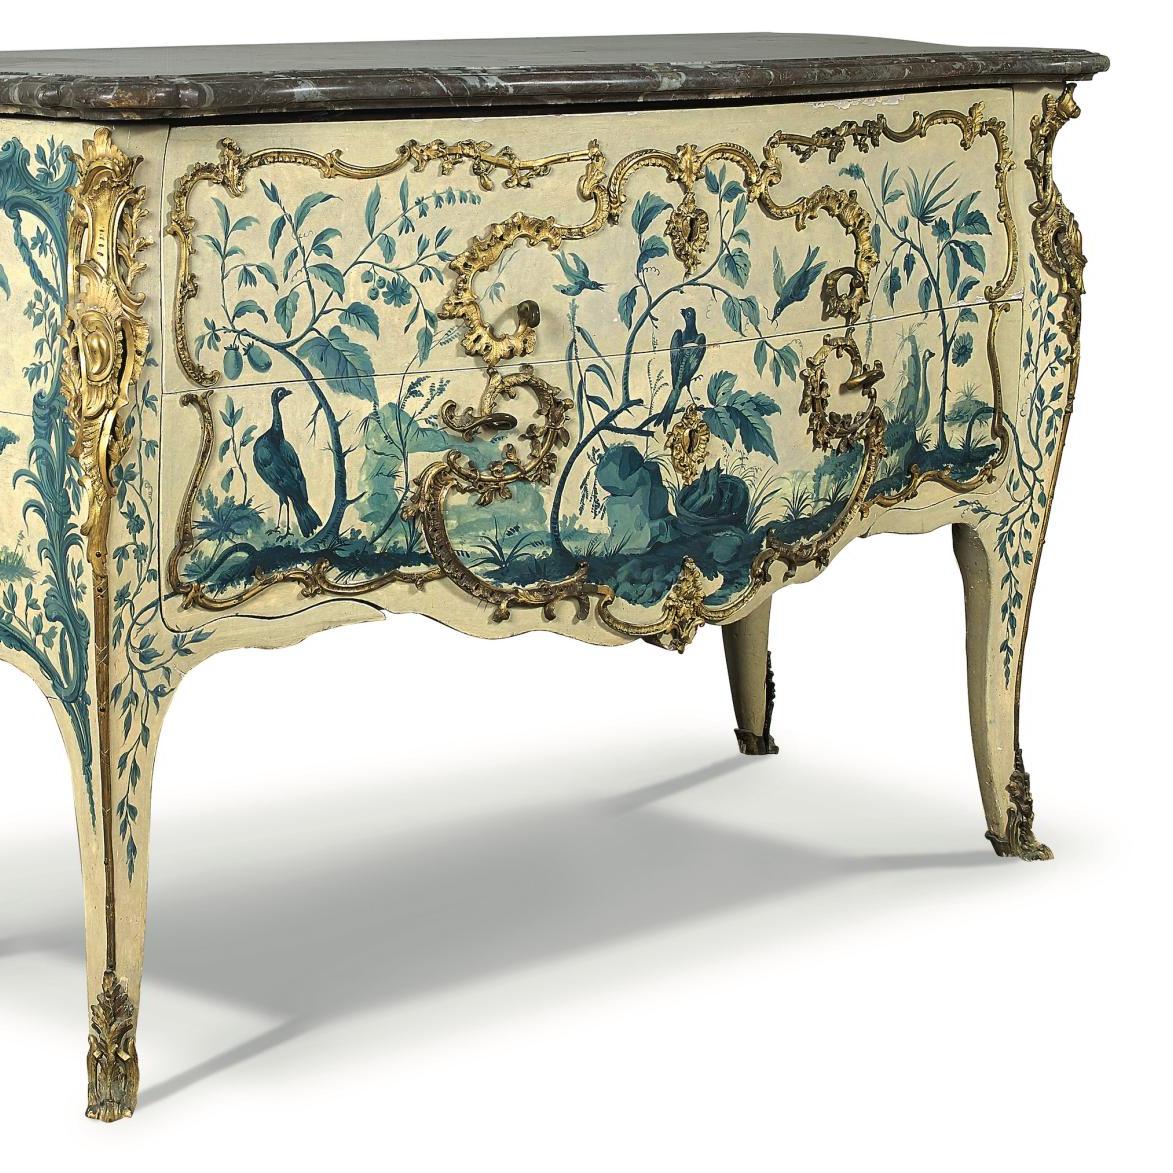 A Perfect Pair and 18th-century French Craftsmanship - Lots sold